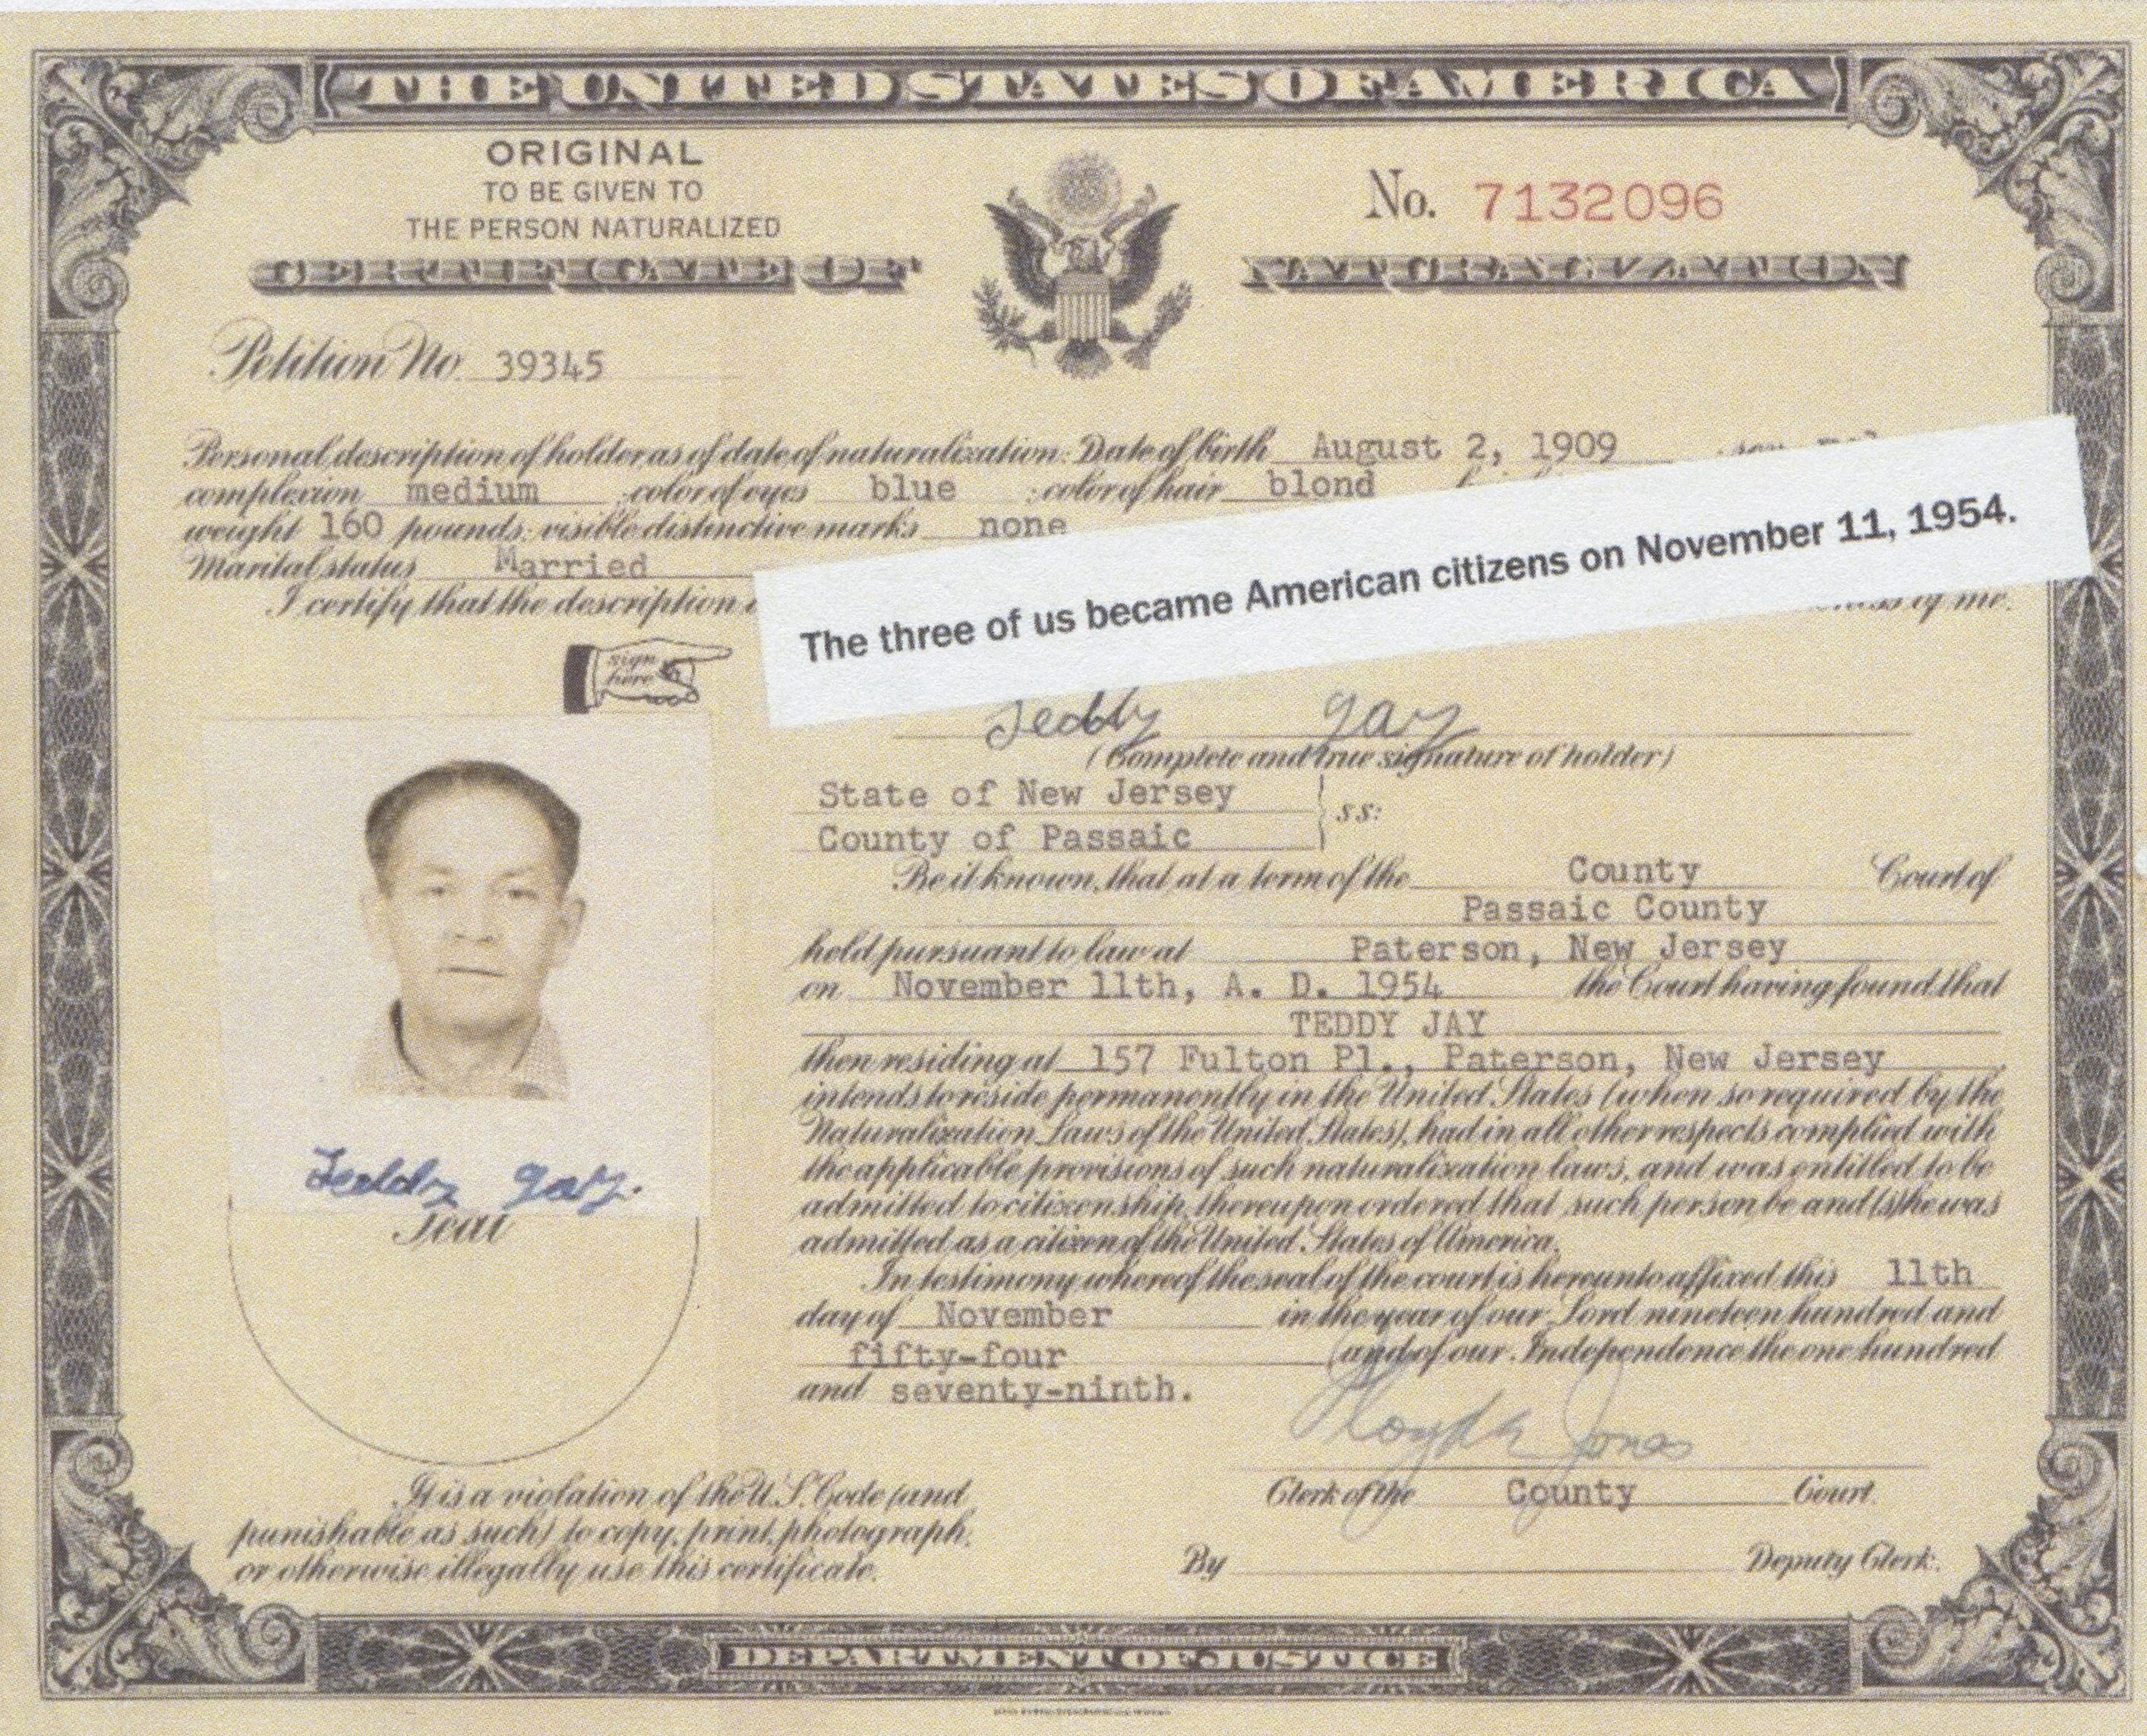 Minia's citizenship papers